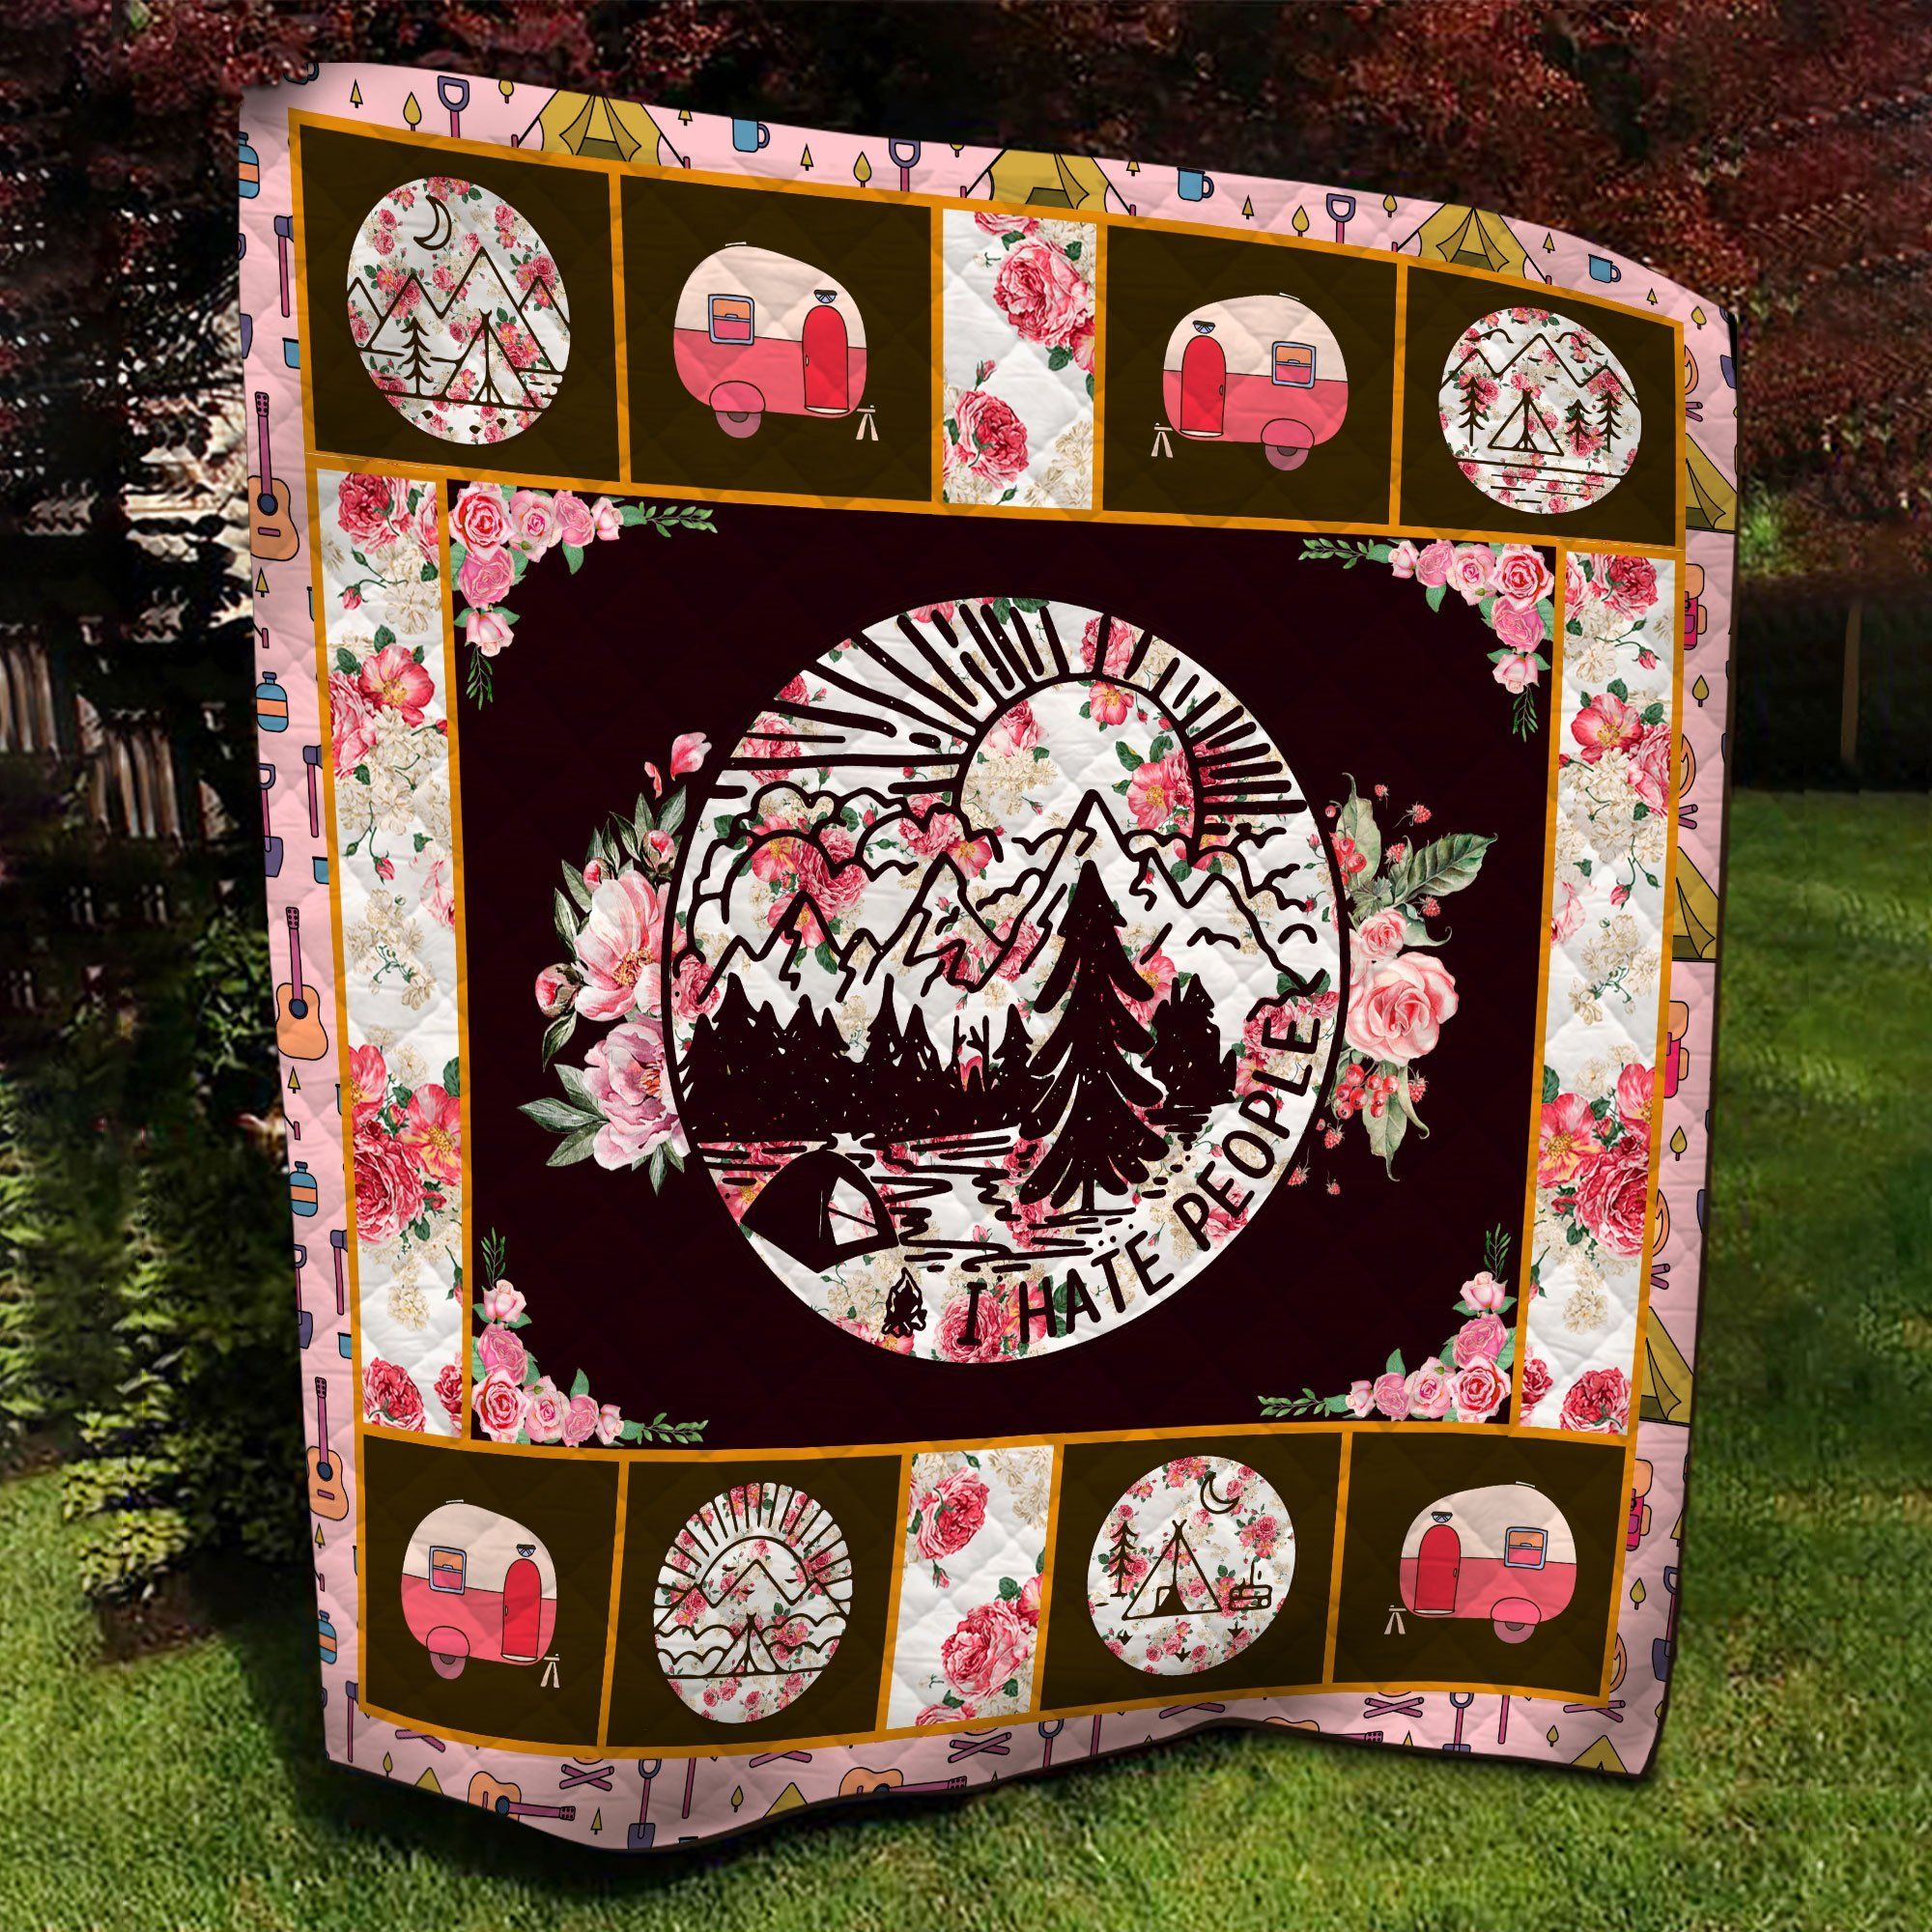 Floral I Hate People Camping Quilt